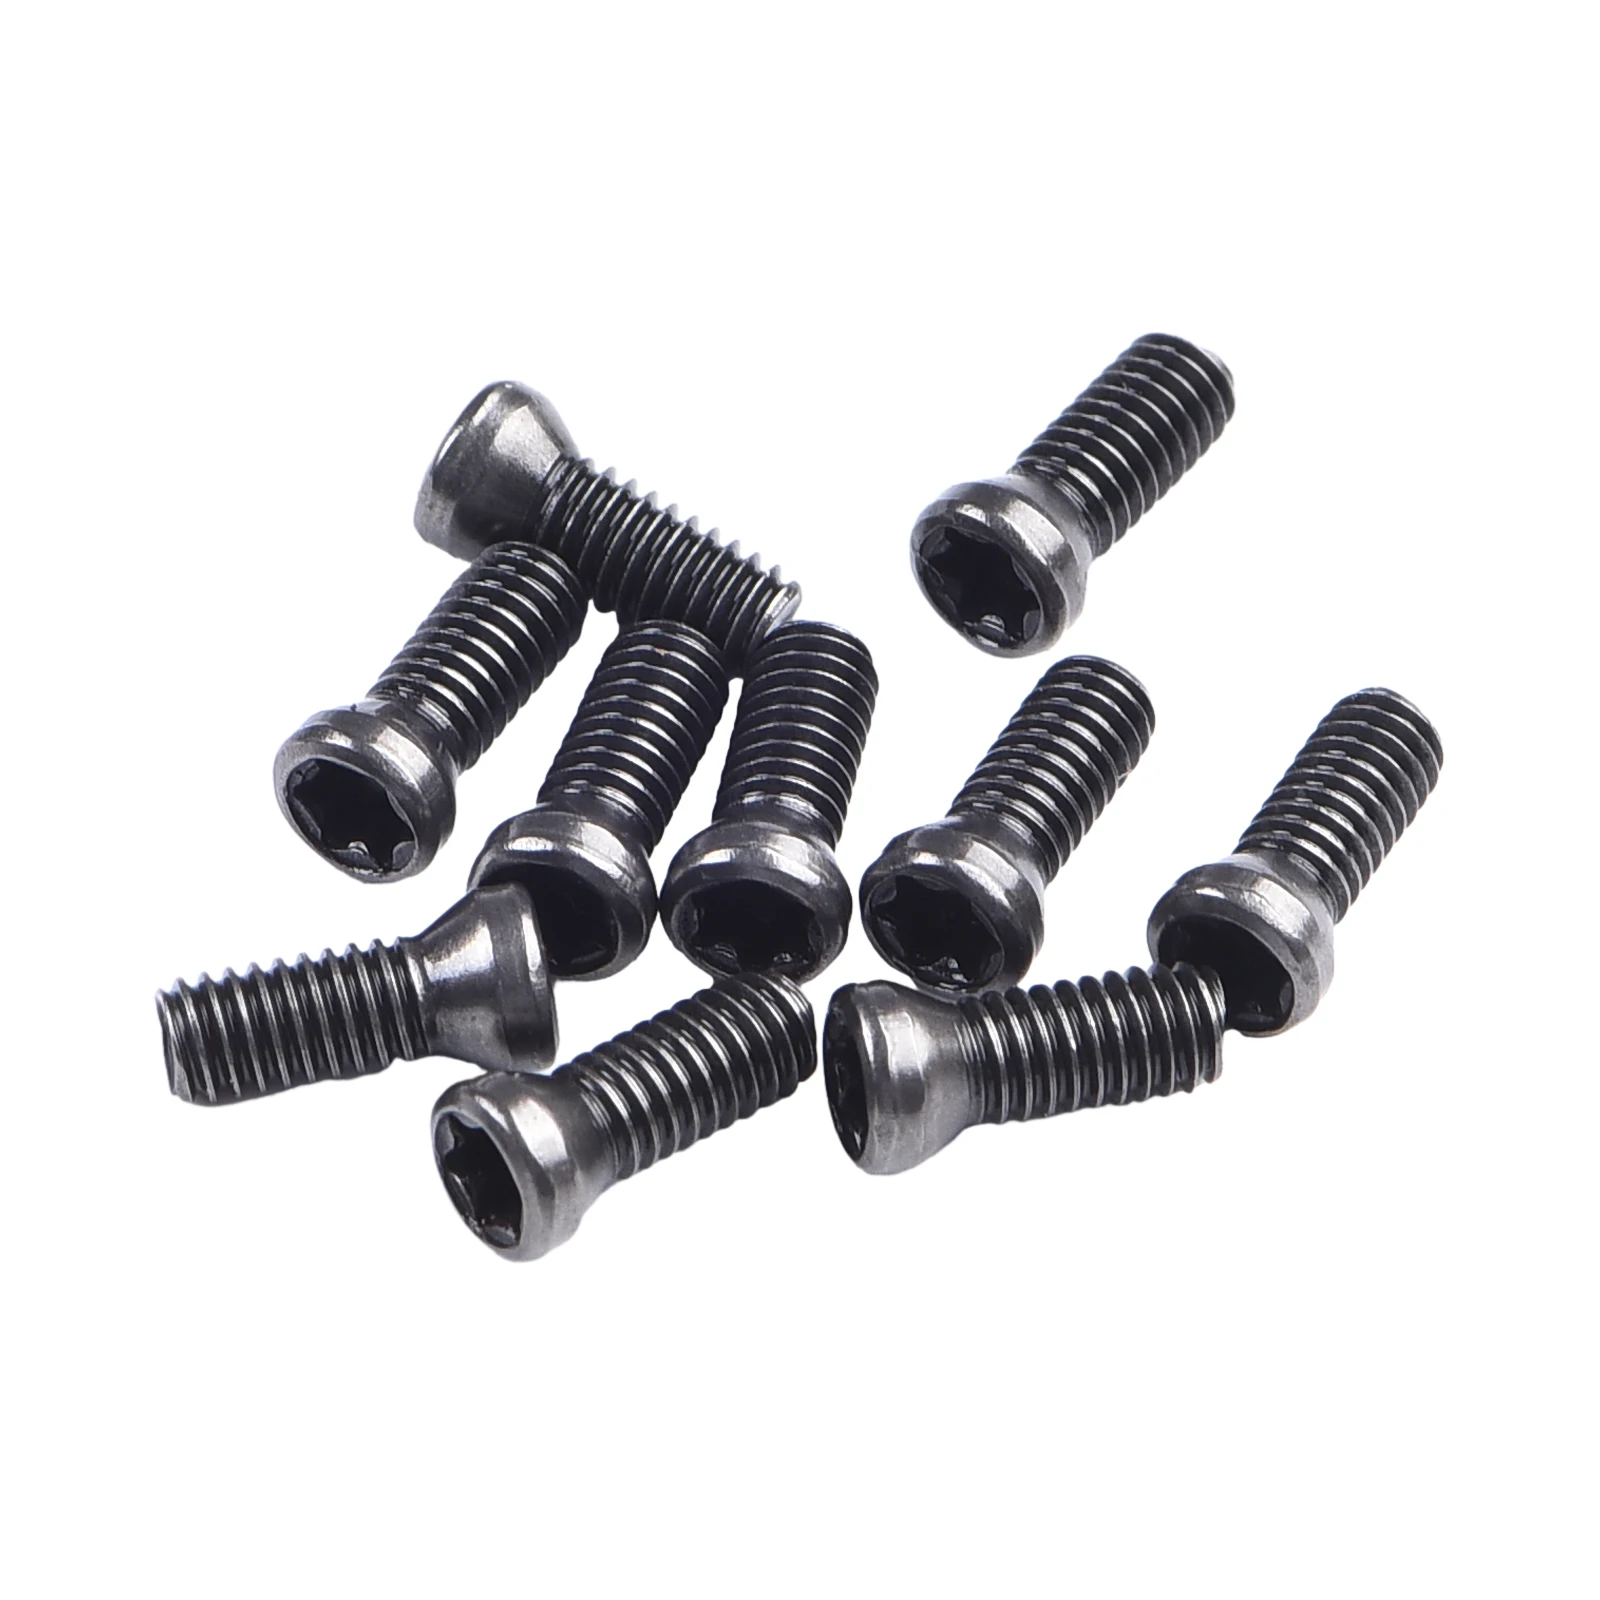 Screw Bolt Torx Screws 10pcs CNC Carbide Insert Torx Screw Inserts Lathe Steel Numerical Control Office Equipment mzg ttx32r 6001 6002 6005 zm856 stainless steel cnc threading toolholder indexable cement carbide vertical screw threaded insert